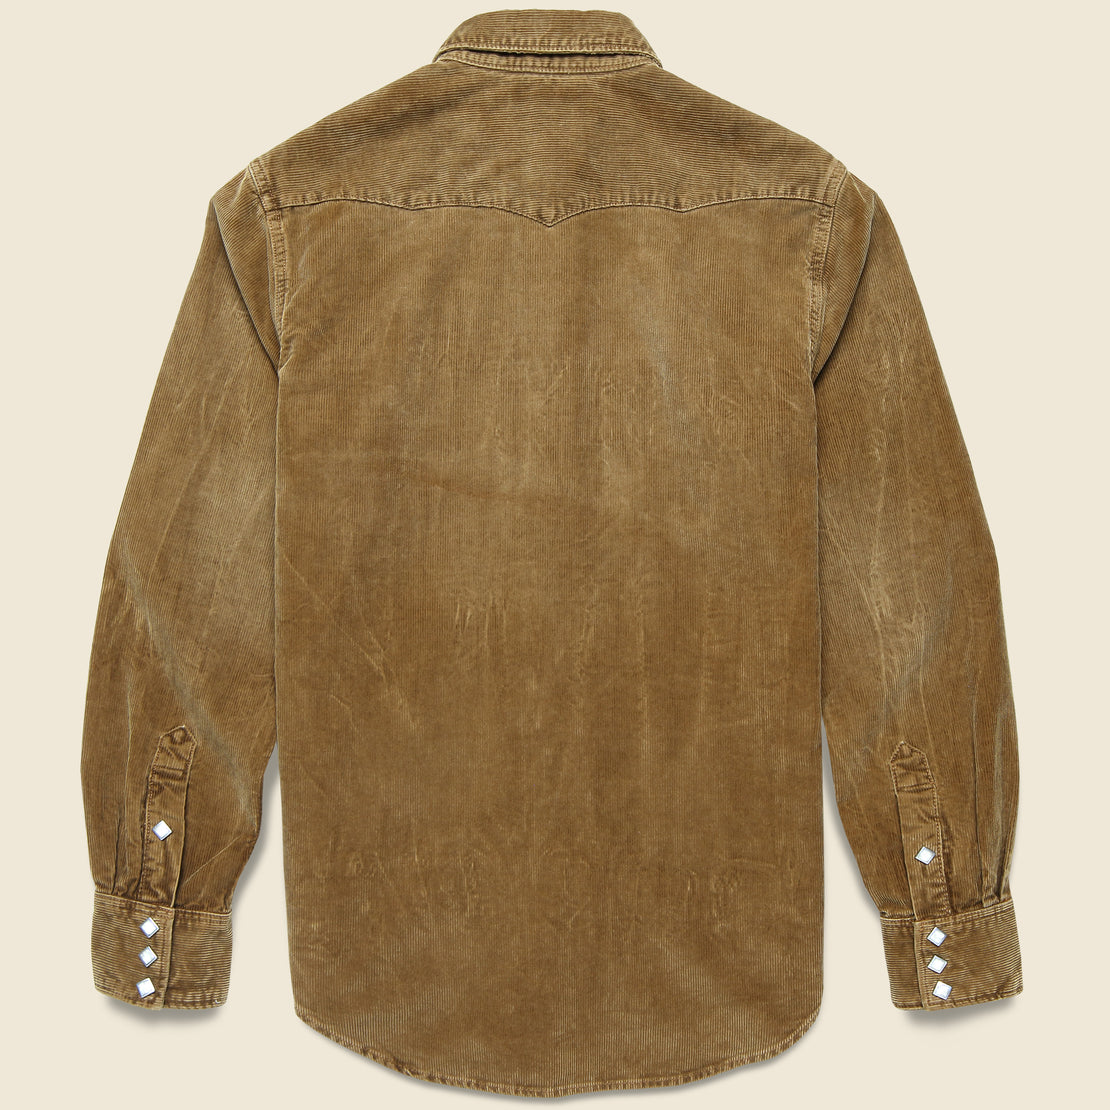 Buffalo Western Corduroy Shirt - Faded Tan - RRL - STAG Provisions - Tops - L/S Woven - Corduroy